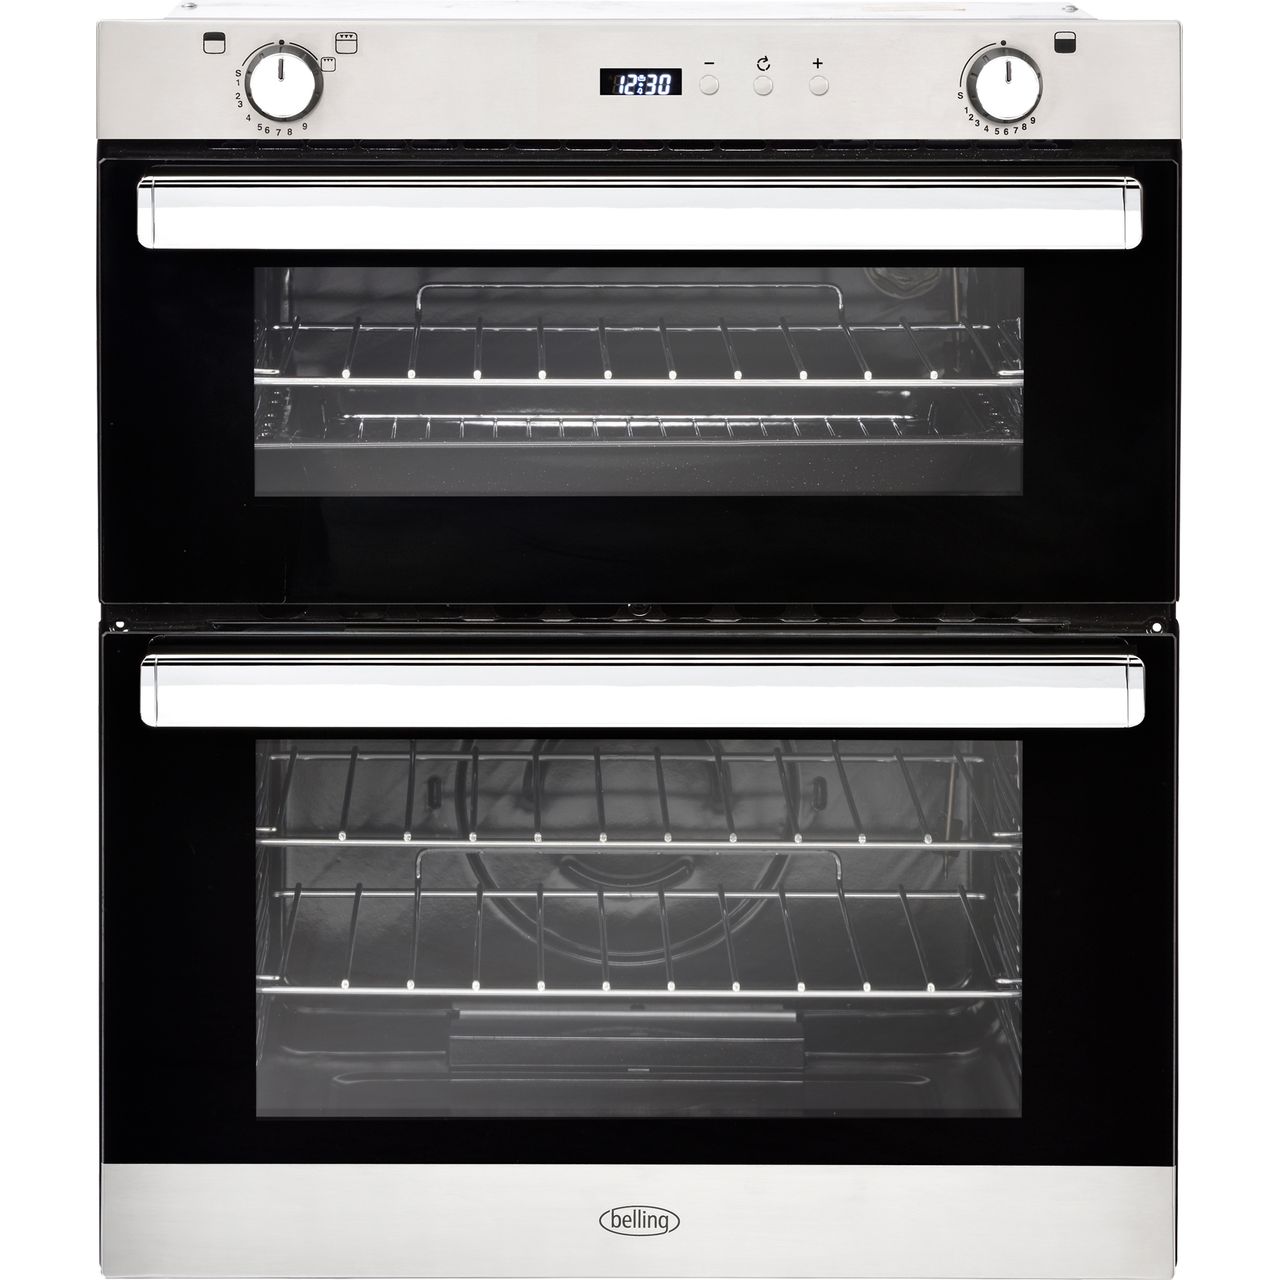 Belling BI702G Built Under Double Oven with Full Width Electric Grill specs